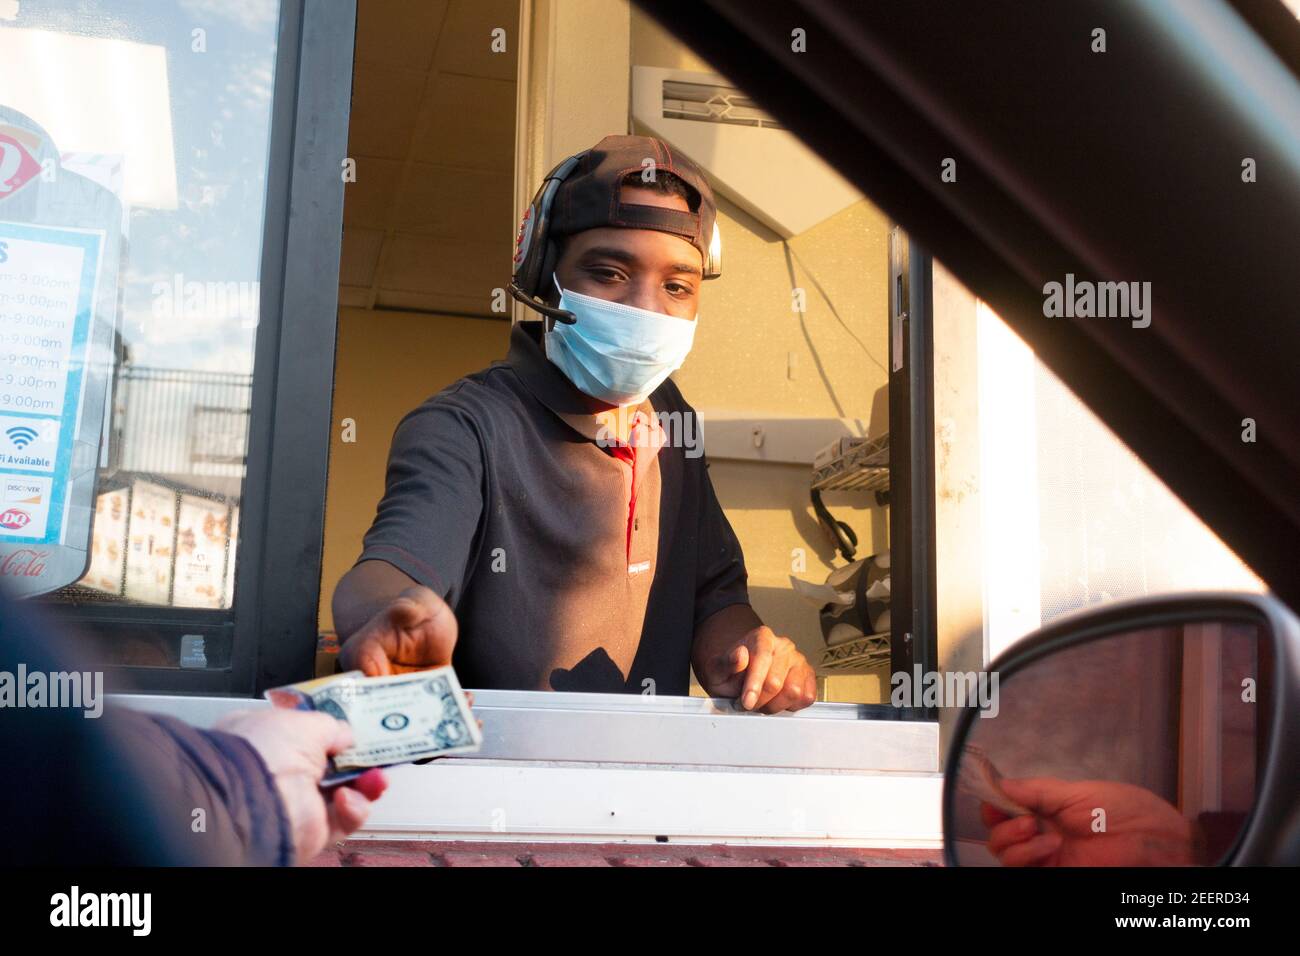 Customer handing masked worker a tip and card to pay for a Dairy Queen at the drive-up window. St Paul, Minnesota MN USA Stock Photo